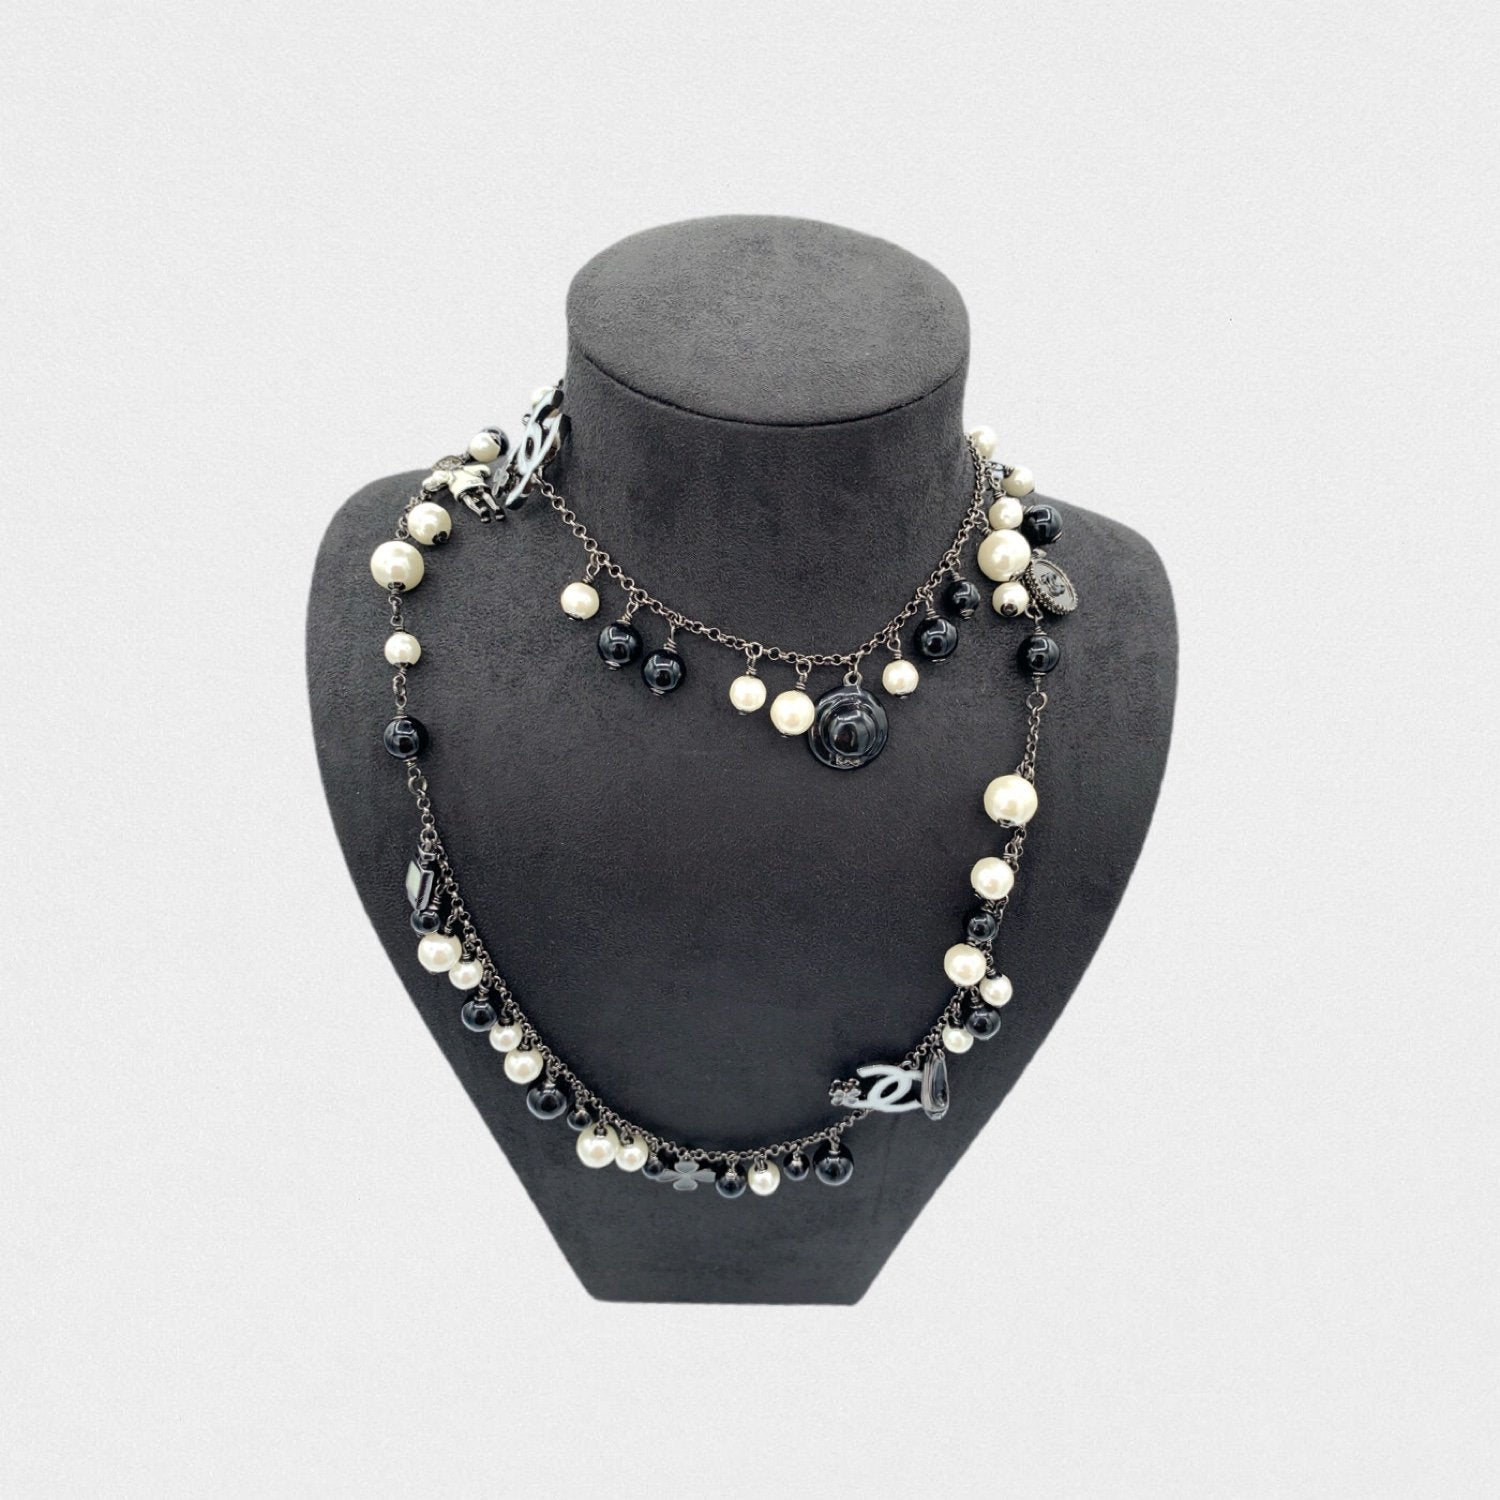 Lysis vintage Chanel CC & pearls long necklace - 2010s